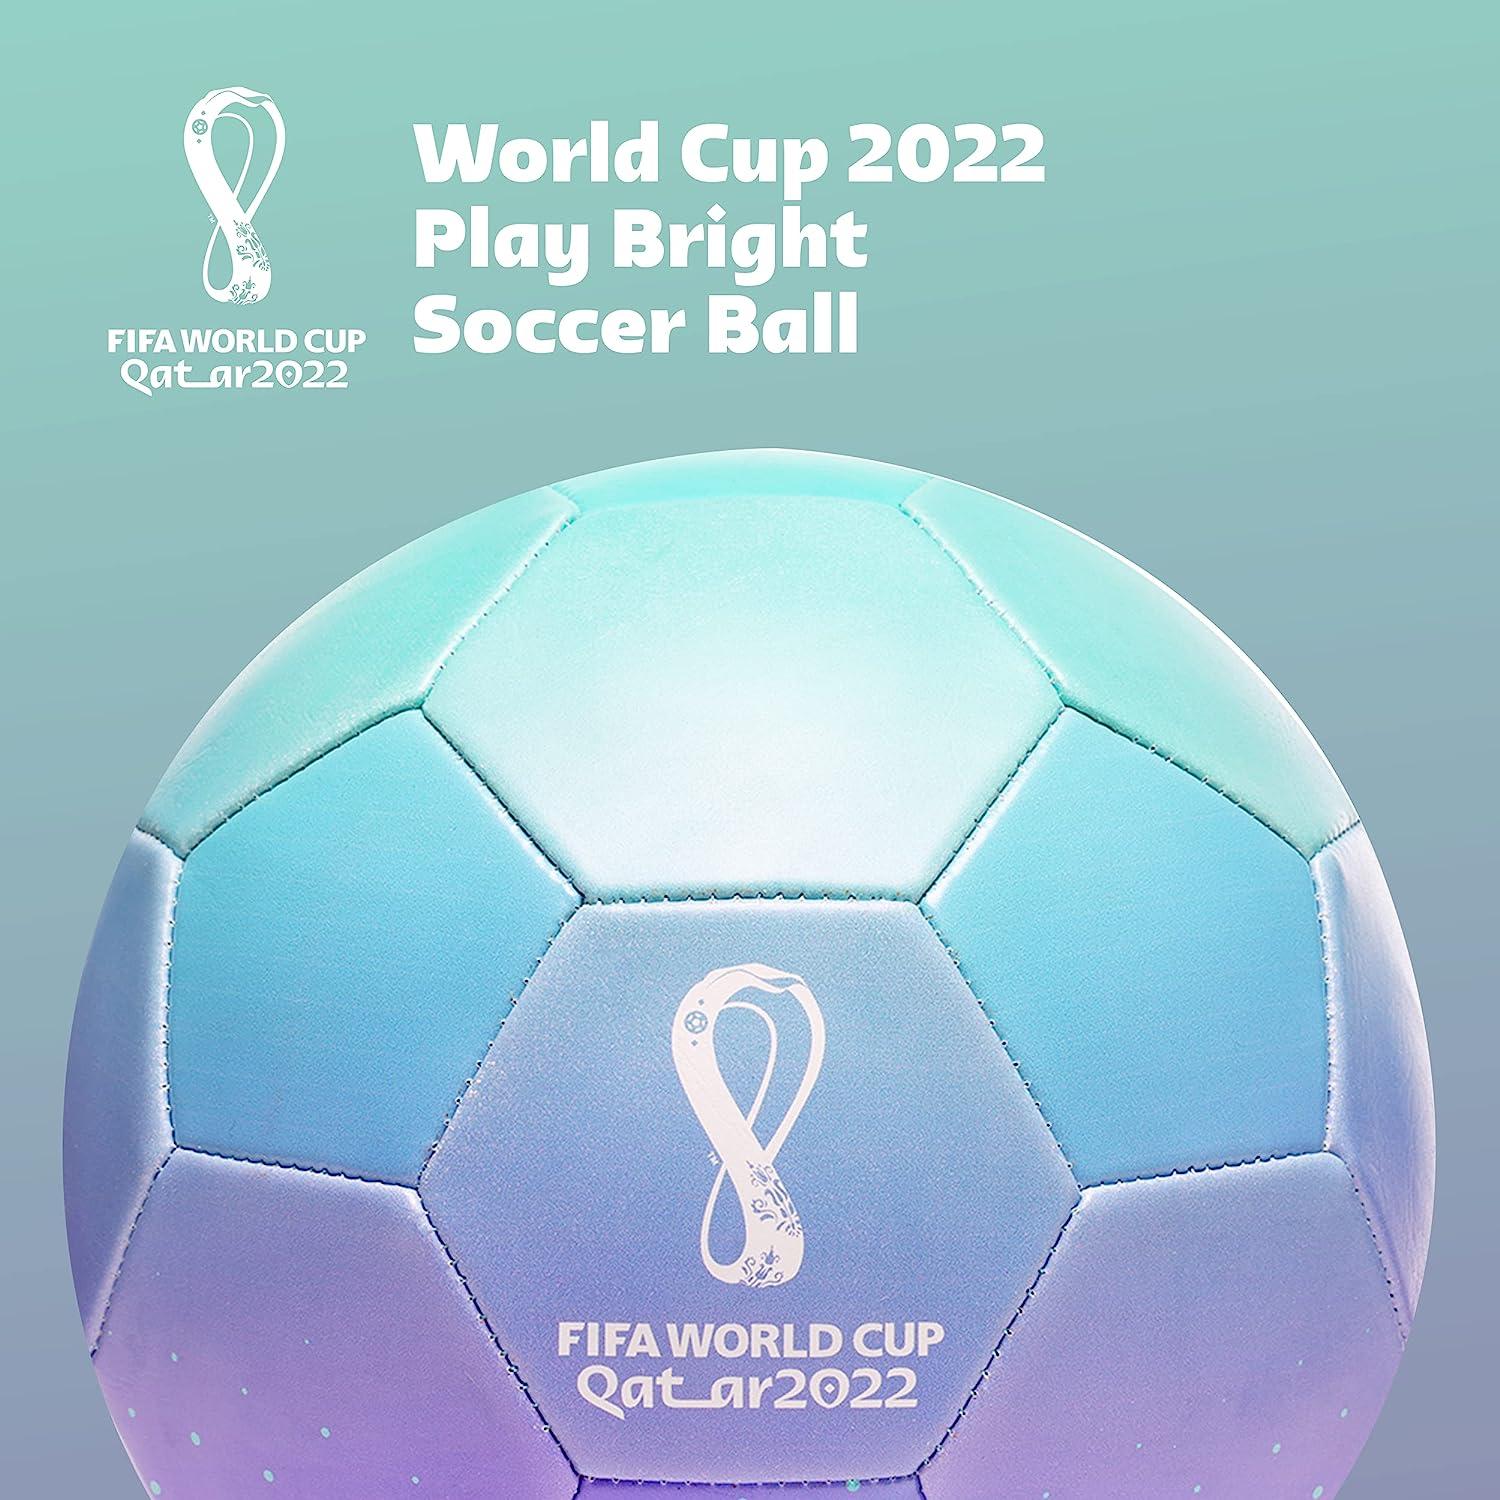 Capelli Sport FIFA World Cup Qatar 2022 Tournament Soccer Ball Souvenir Display, Officially Licensed Futbol for Youth and Adult Soccer Players, Play Bright